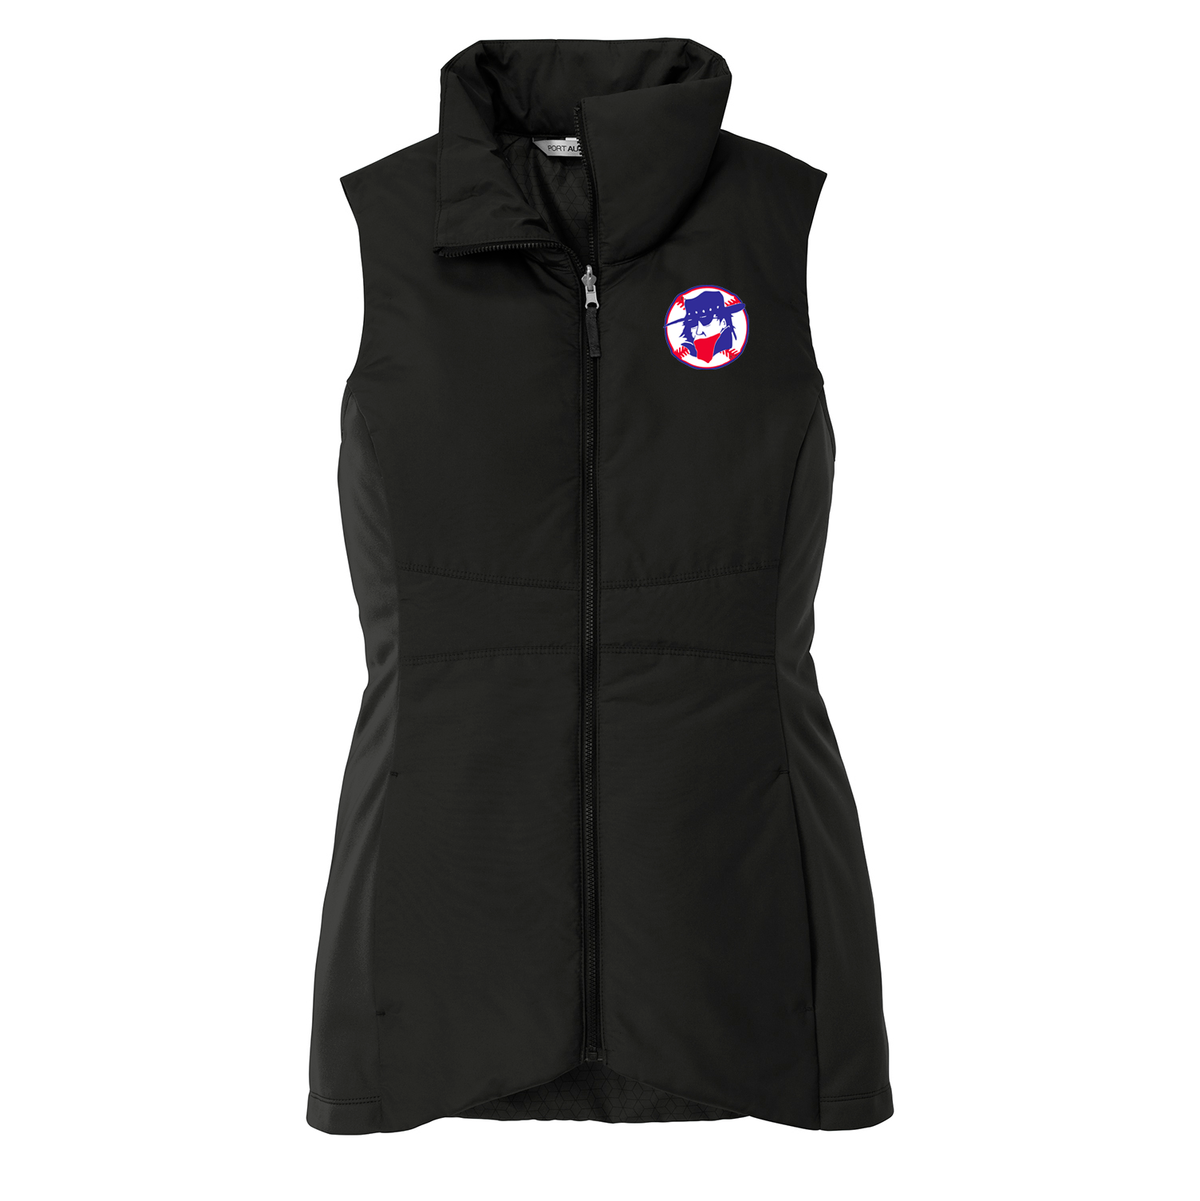 Southern Indiana Outlaws Baseball Women's Vest